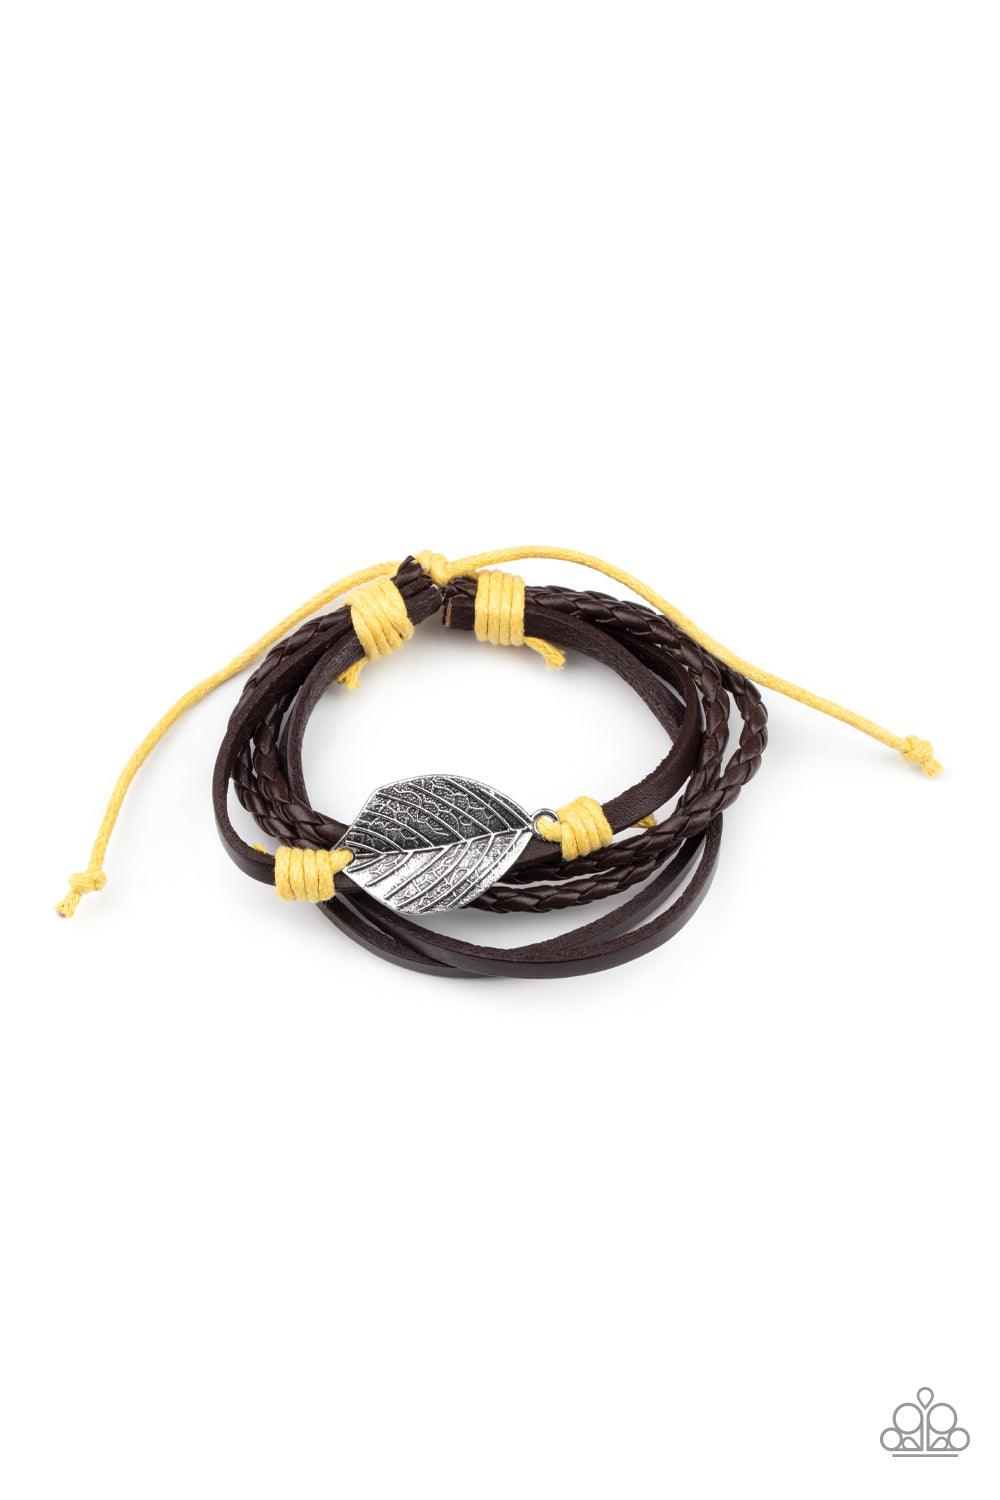 Paparazzi Accessories FROND and Center - Yellow A lifelike silver leaf frame is knotted in place with yellow cording across the front of a dainty brown leather band. Matching plain and braided leather bands join the centerpiece, creating earthy layers aro